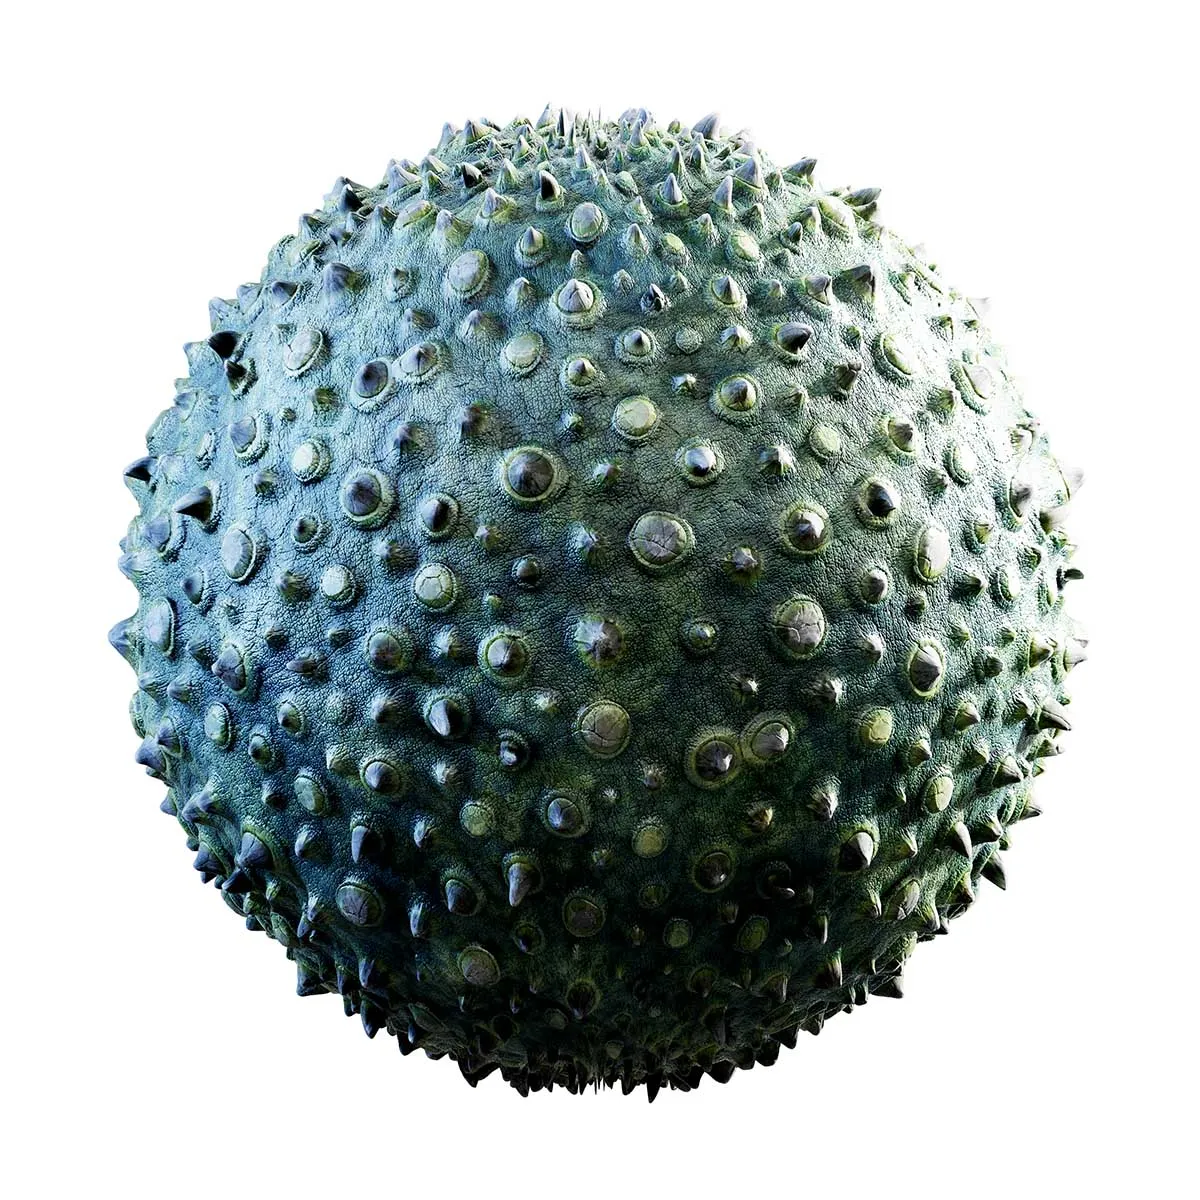 CGAxis PBR 31 – Green Creature Skin With Spikes 32 36